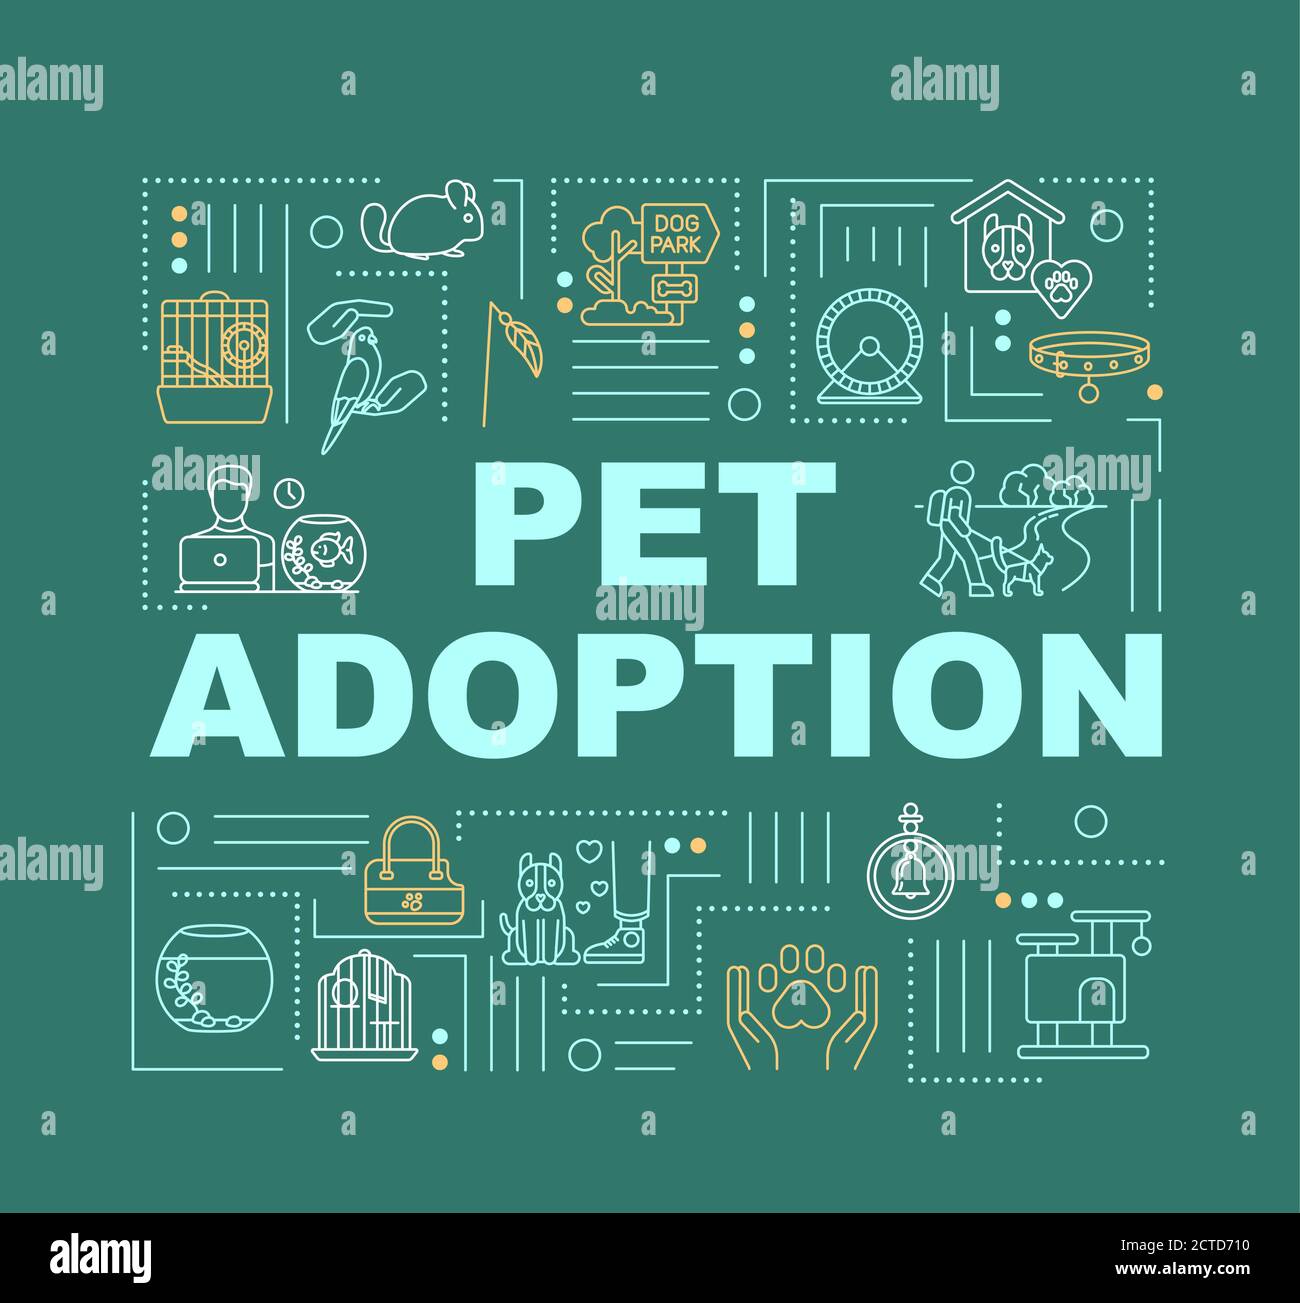 Pet adoption service word concepts banner Stock Vector